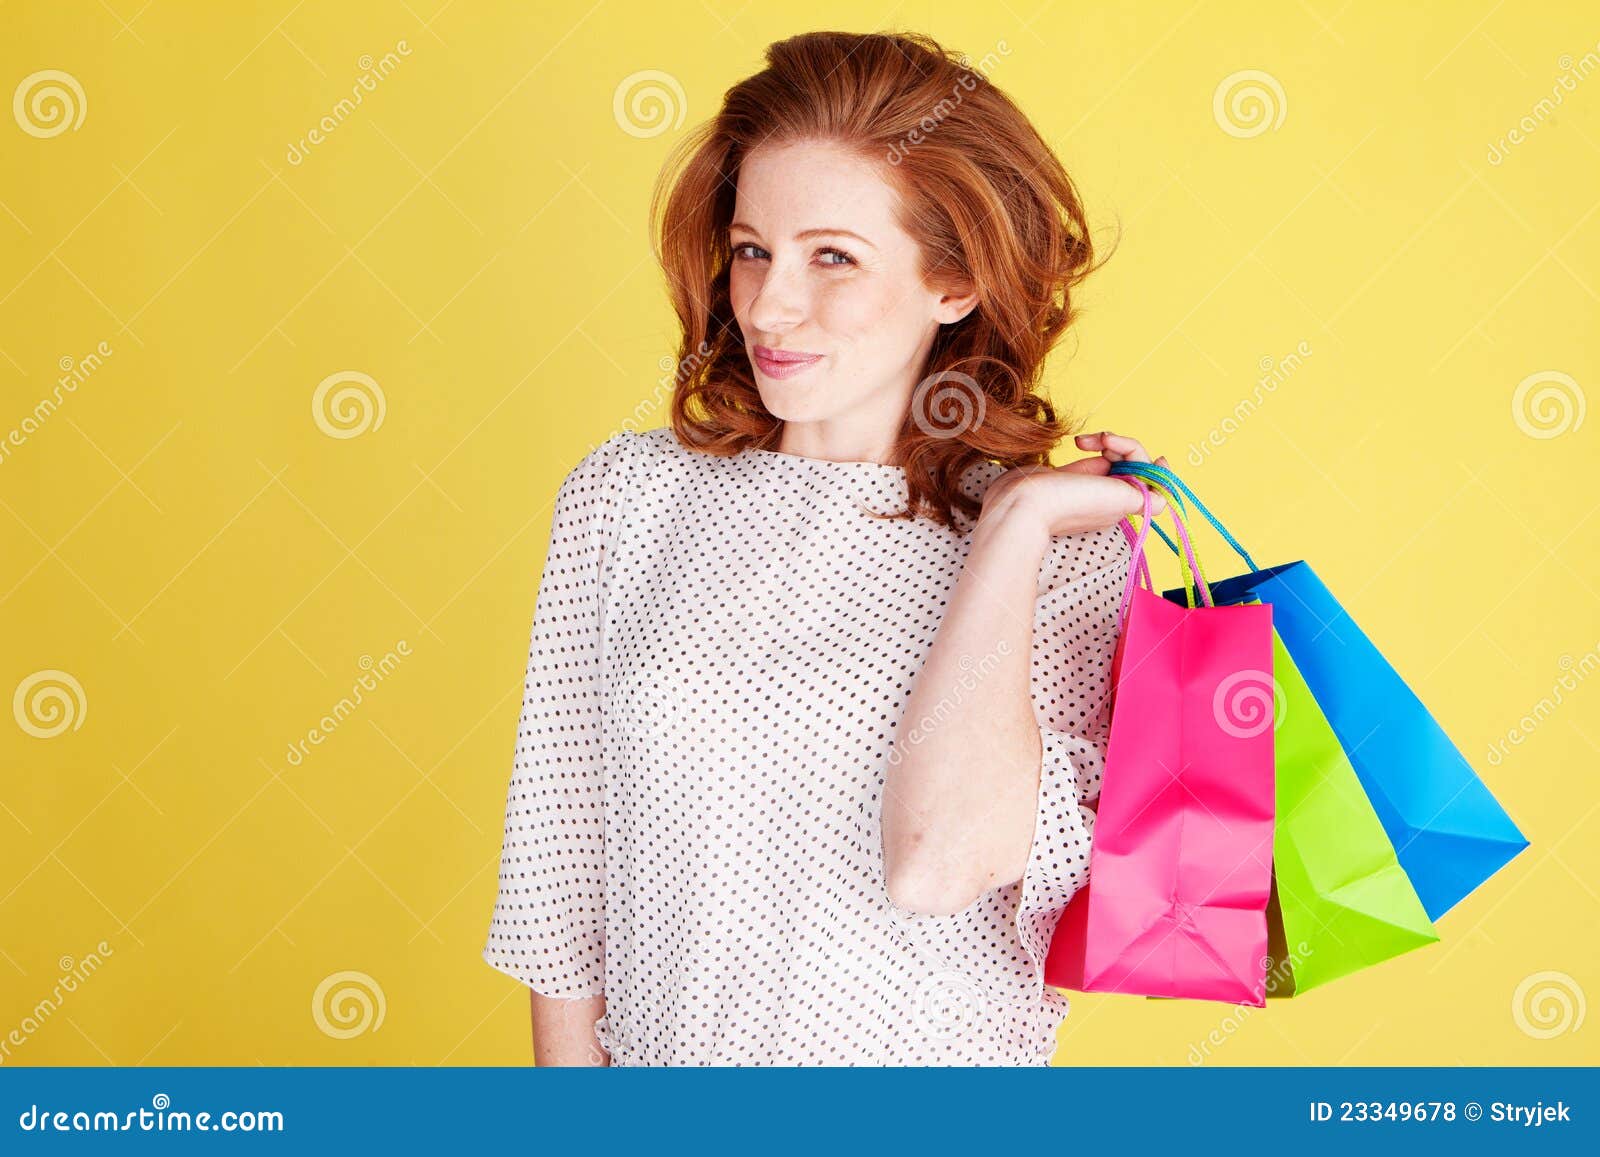 teasing woman with colourful bags